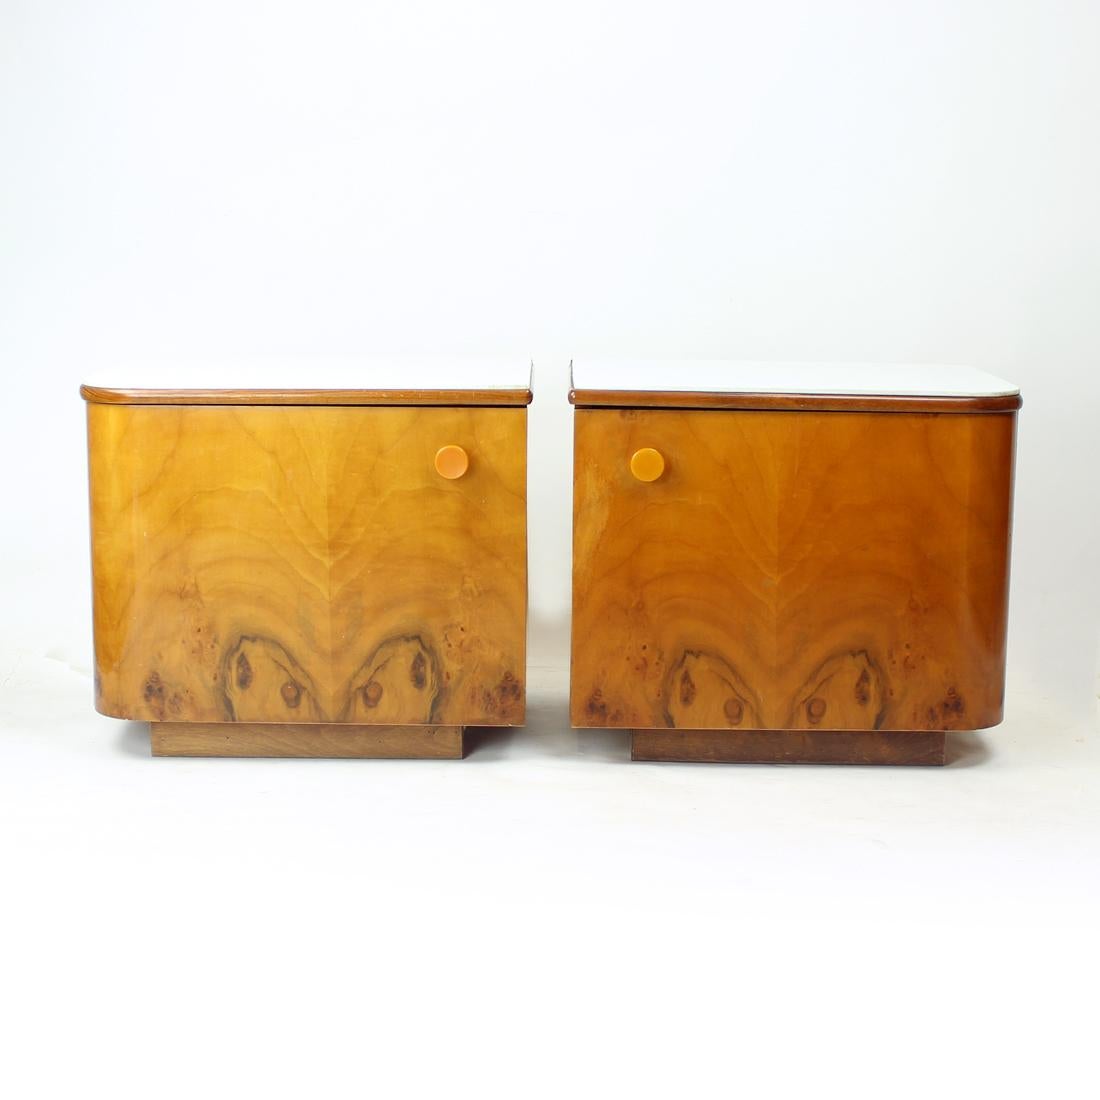 Mid-20th Century 1960s Bedside Tables In Walnut And White Glass, Czechoslovakia For Sale